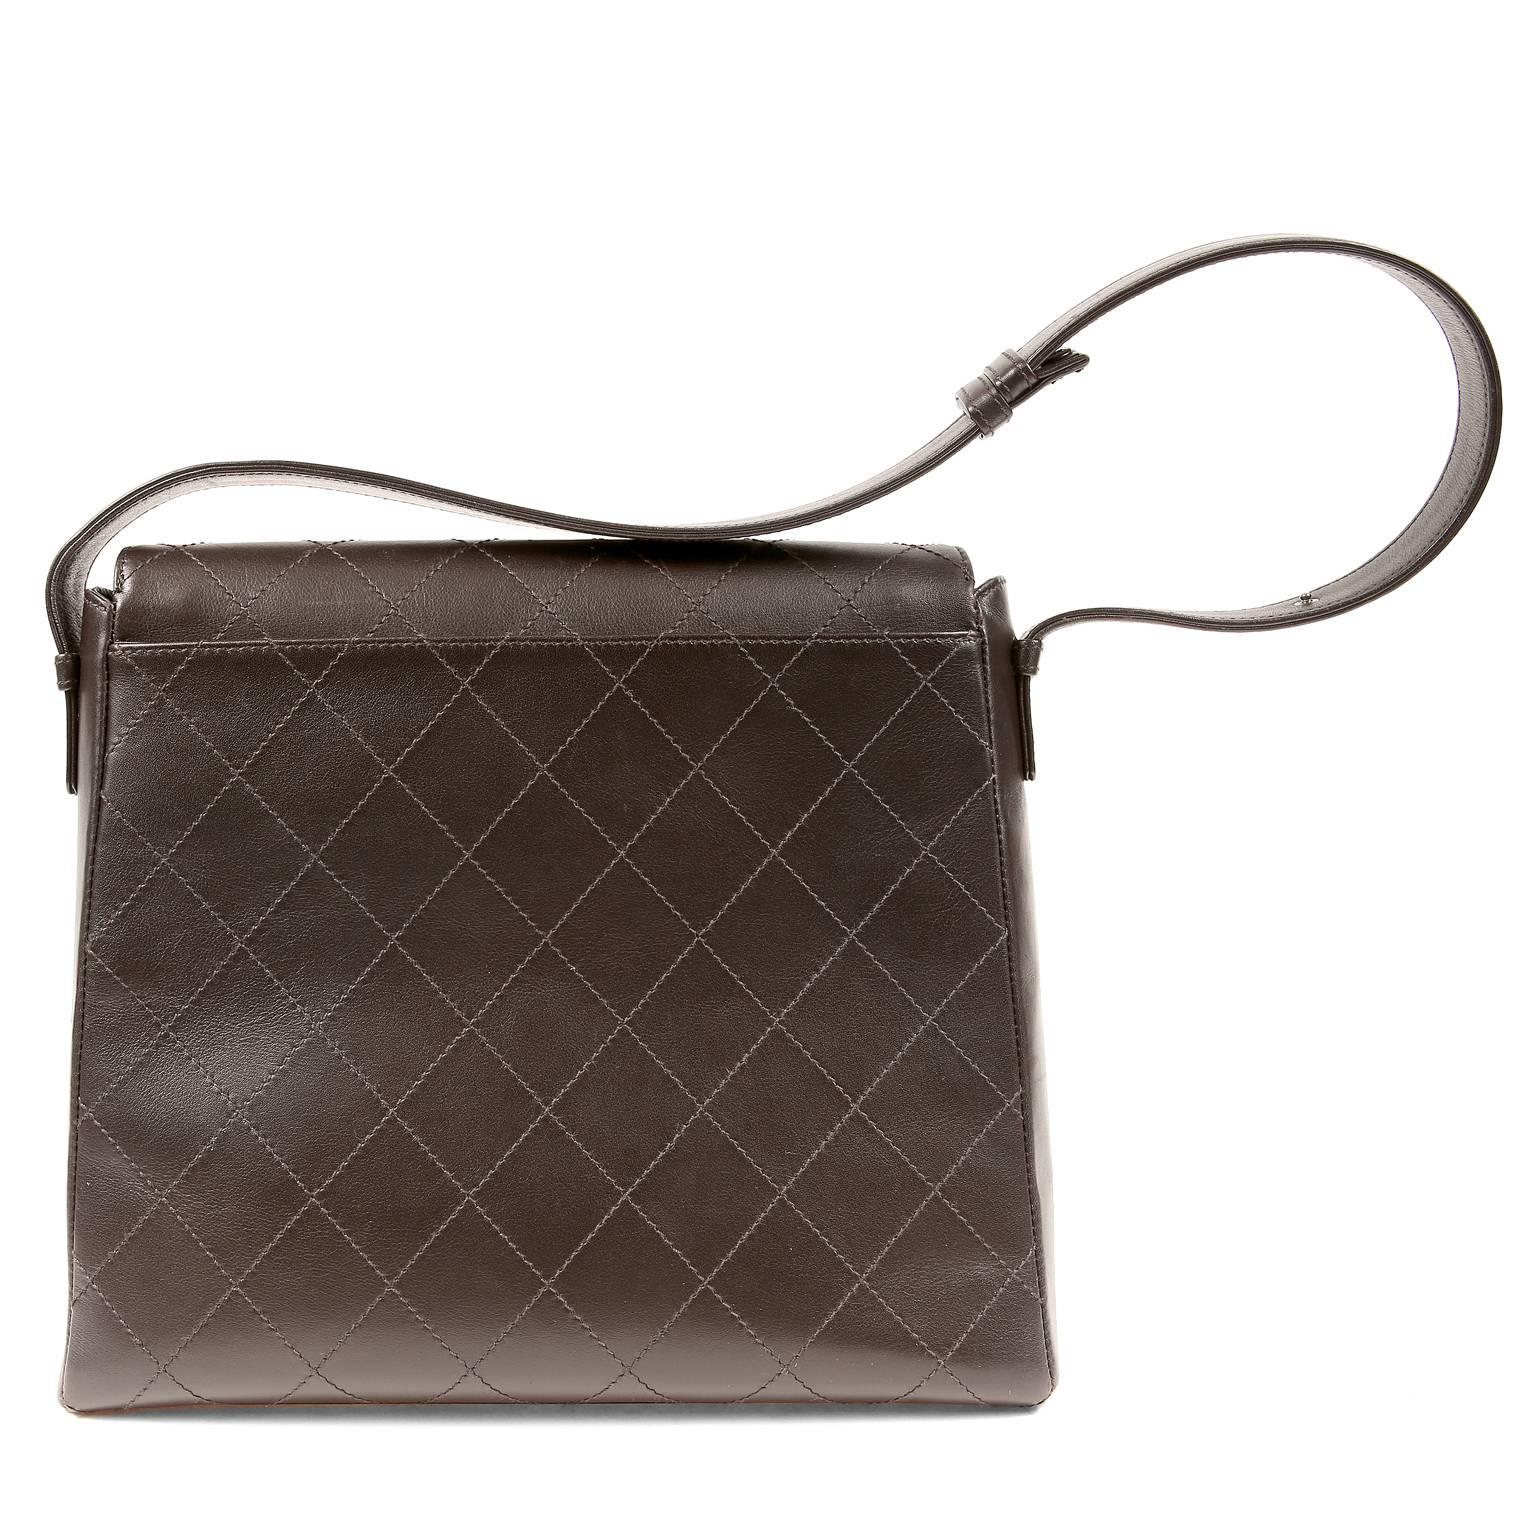 Chanel Brown Leather Flat Stitched Bag- EXCELLENT
 A simple style with classic lines, this piece has a very desirable versatility.    

Dark brown leather structured bag is stitched with signature Chanel diamond pattern.  Dark brown metallic